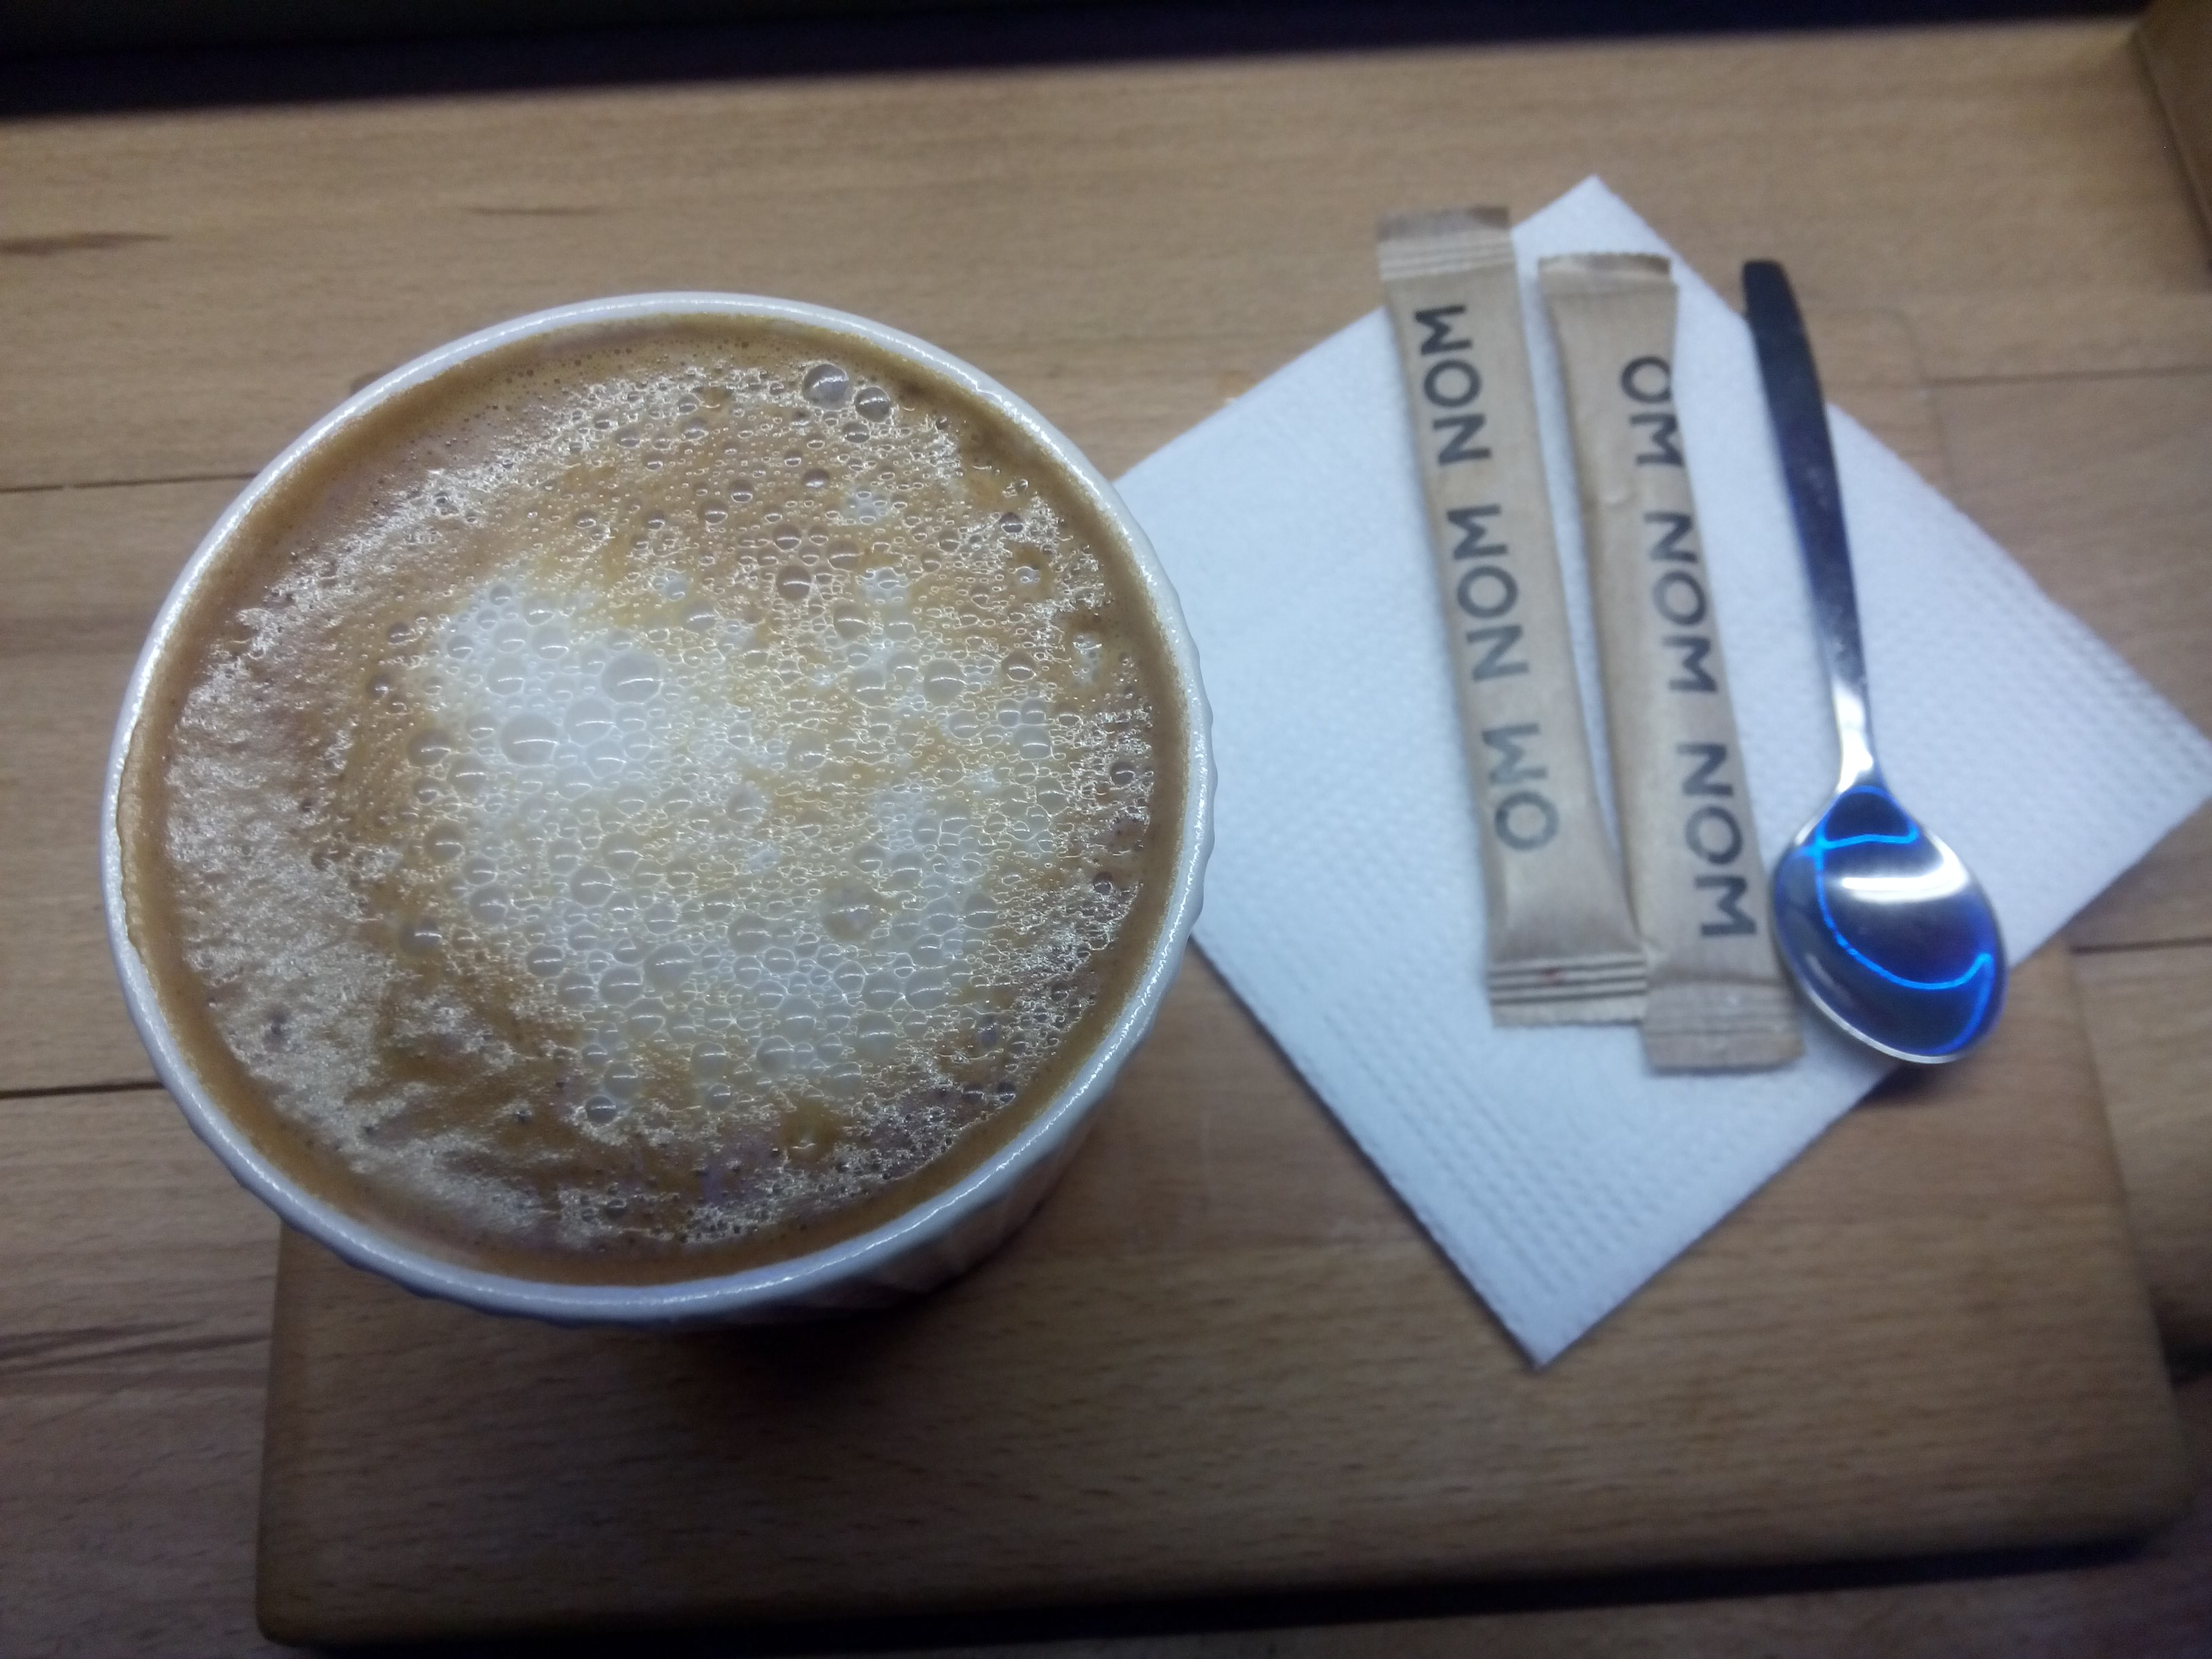 Top view of a foamy coffee drink, next to a napkin and sugar packets